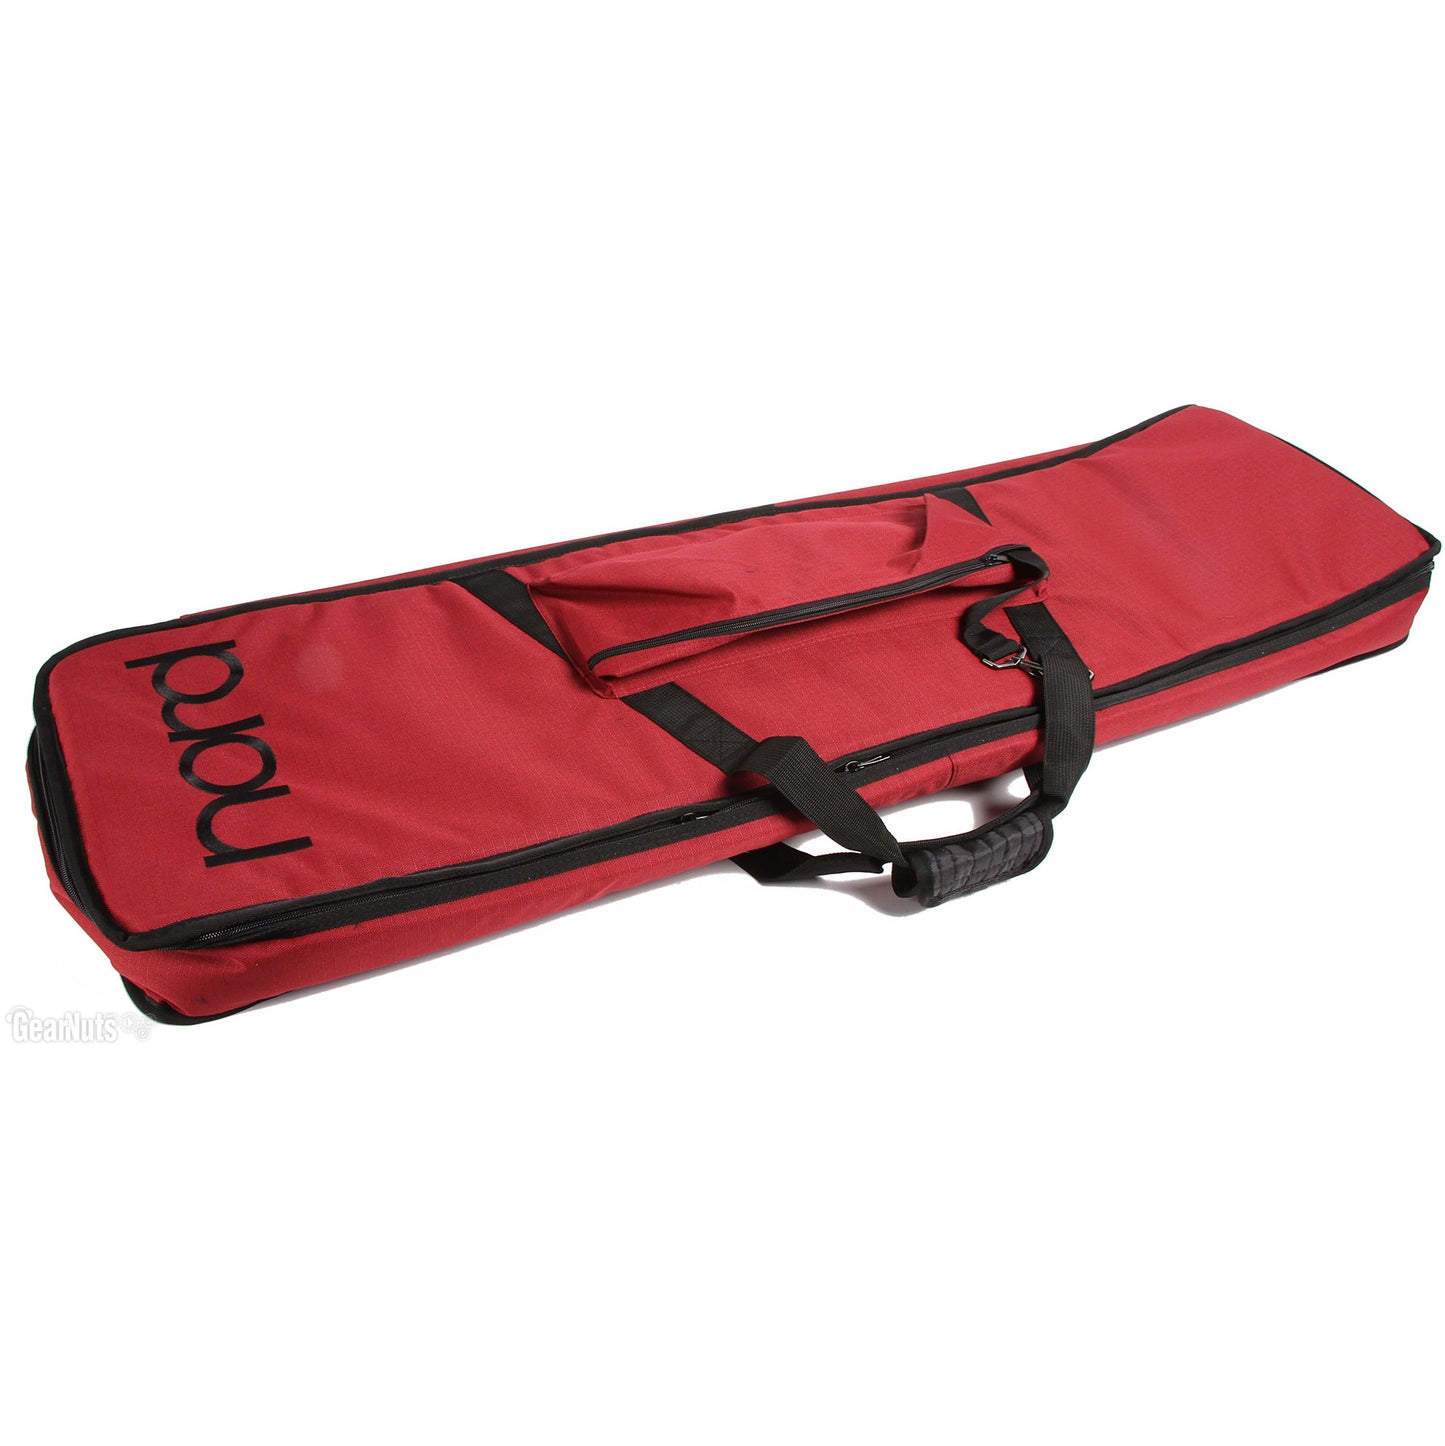 Nord GB73 Keyboard Bag in Red